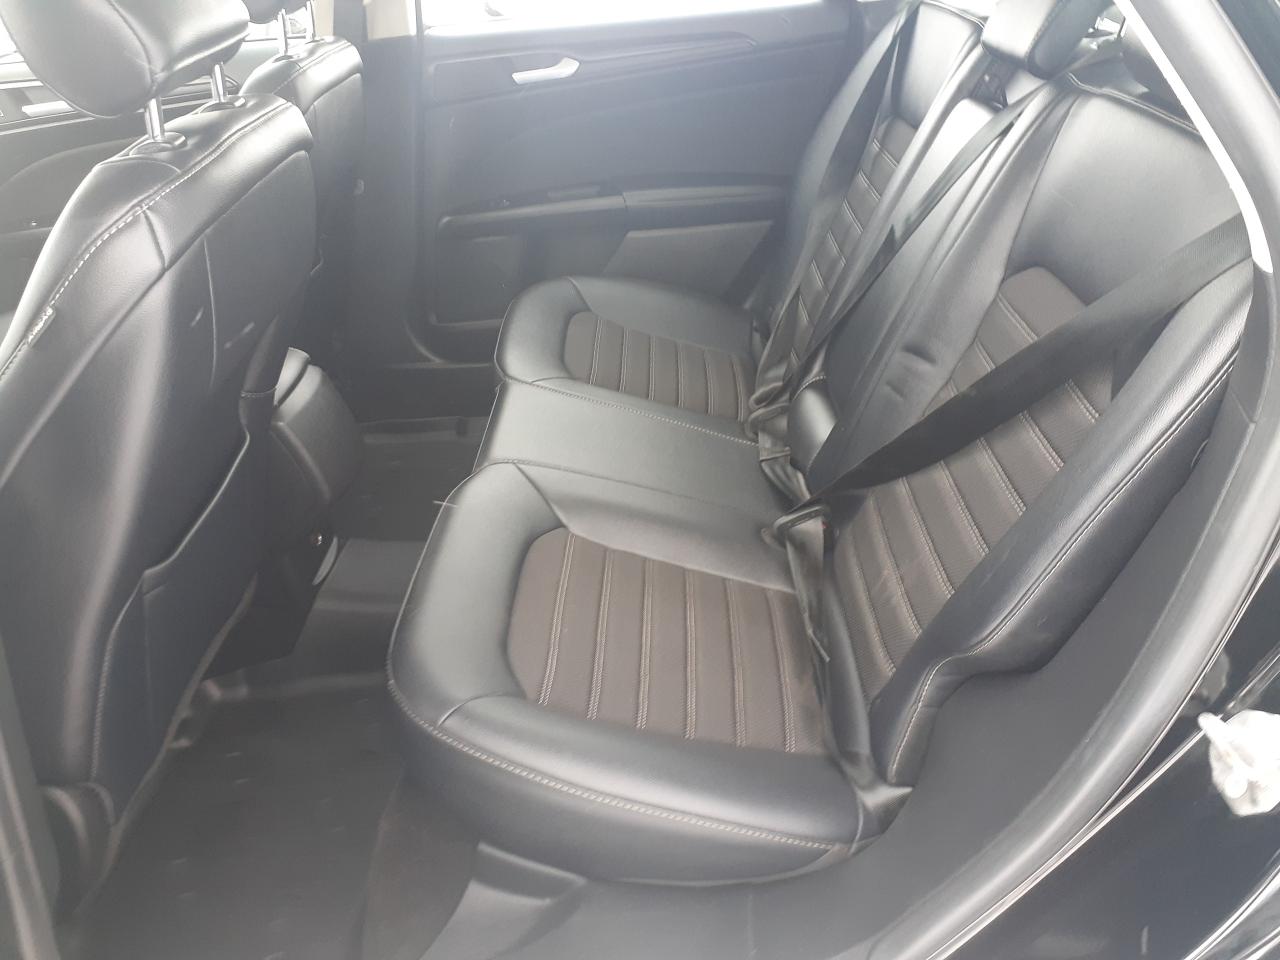 2018 Ford Fusion SE, Leather, Htd Seats, BU Cam, Remote Start - Photo #17